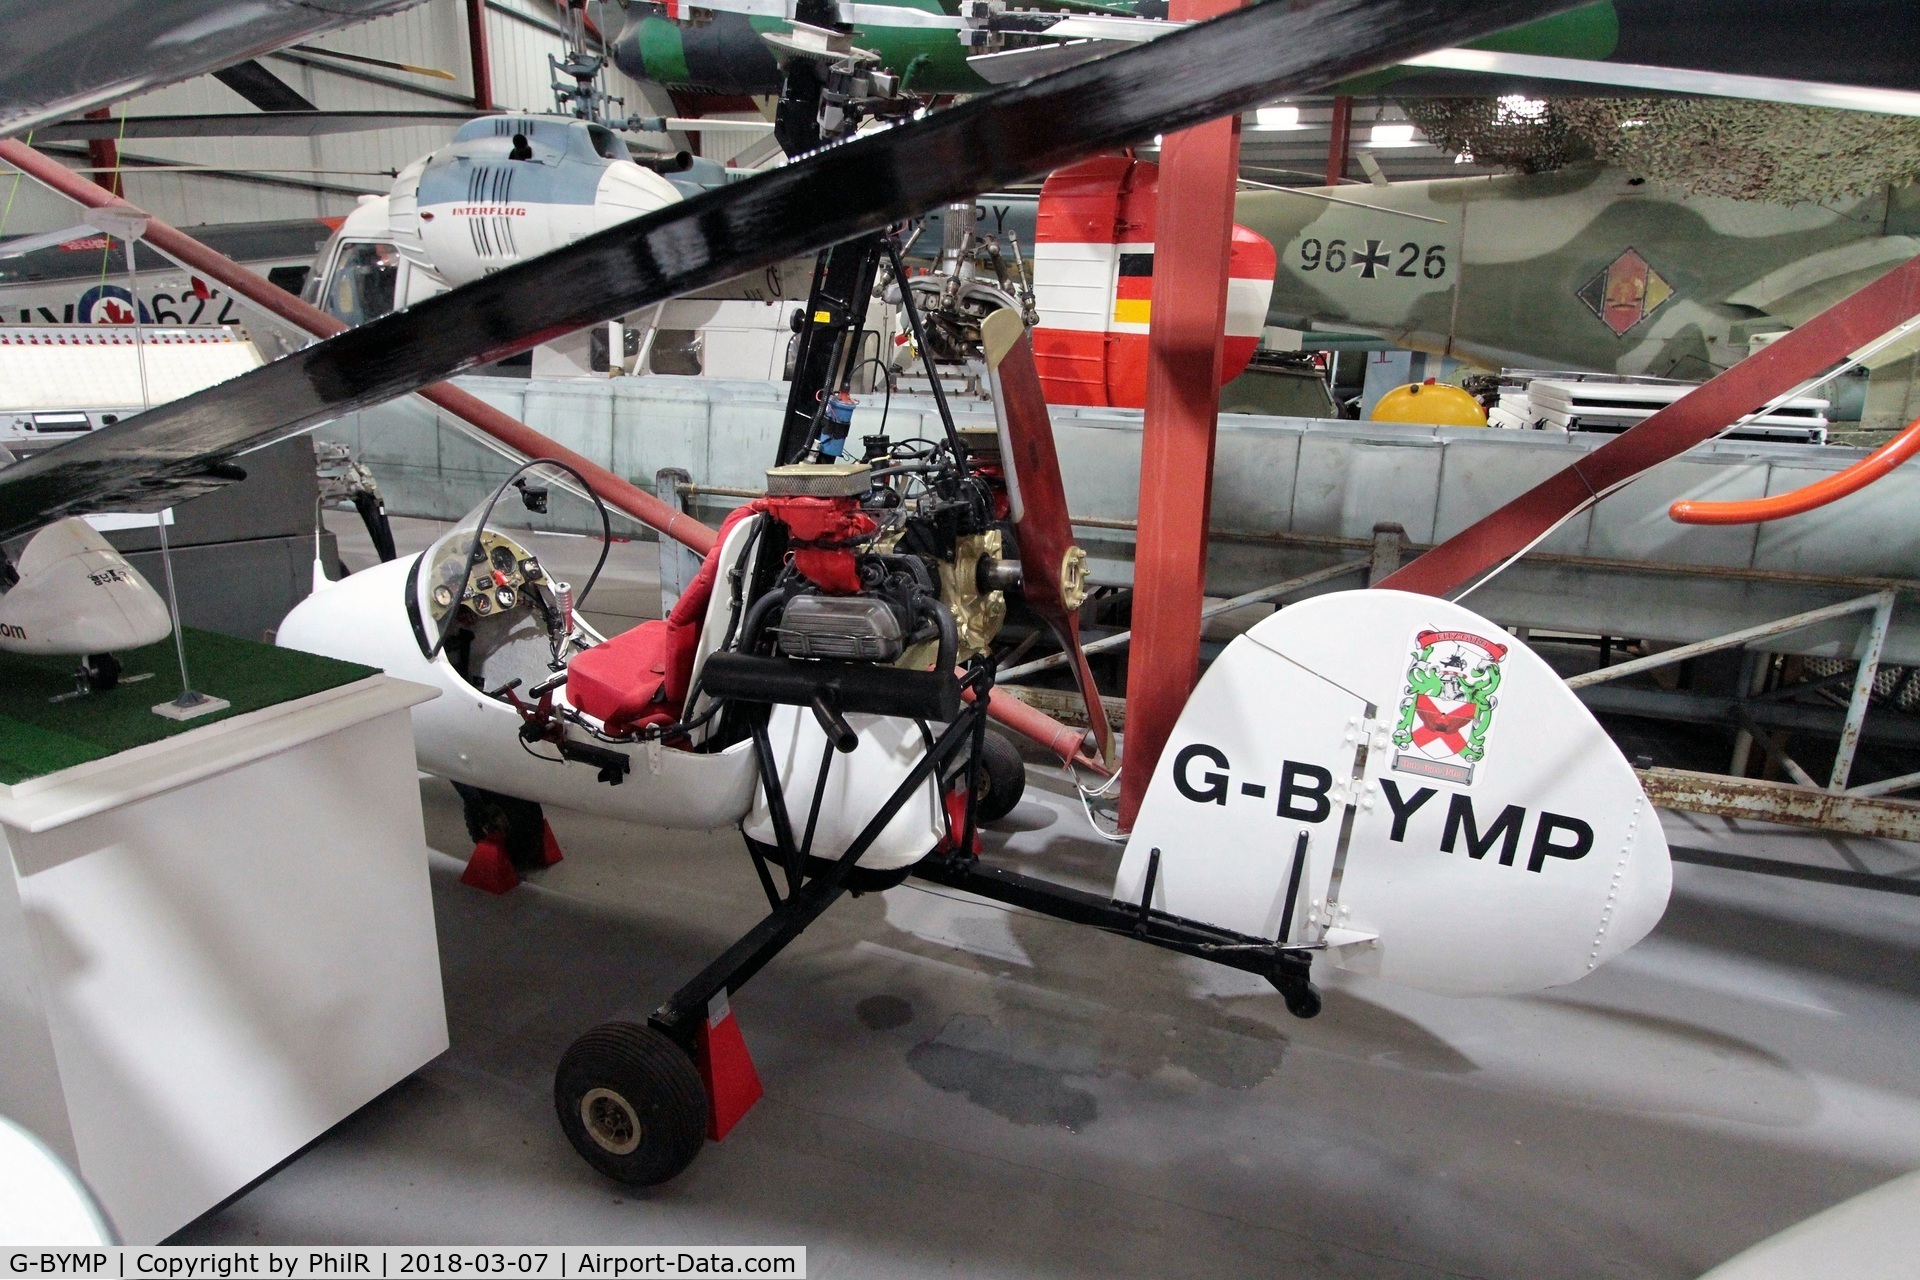 G-BYMP, 1999 Campbell Cricket MK1 C/N PFA G/03-1265, G-BYMP 1999 Fitzgerald Cricket Mk1 Helicopter Museum(1)